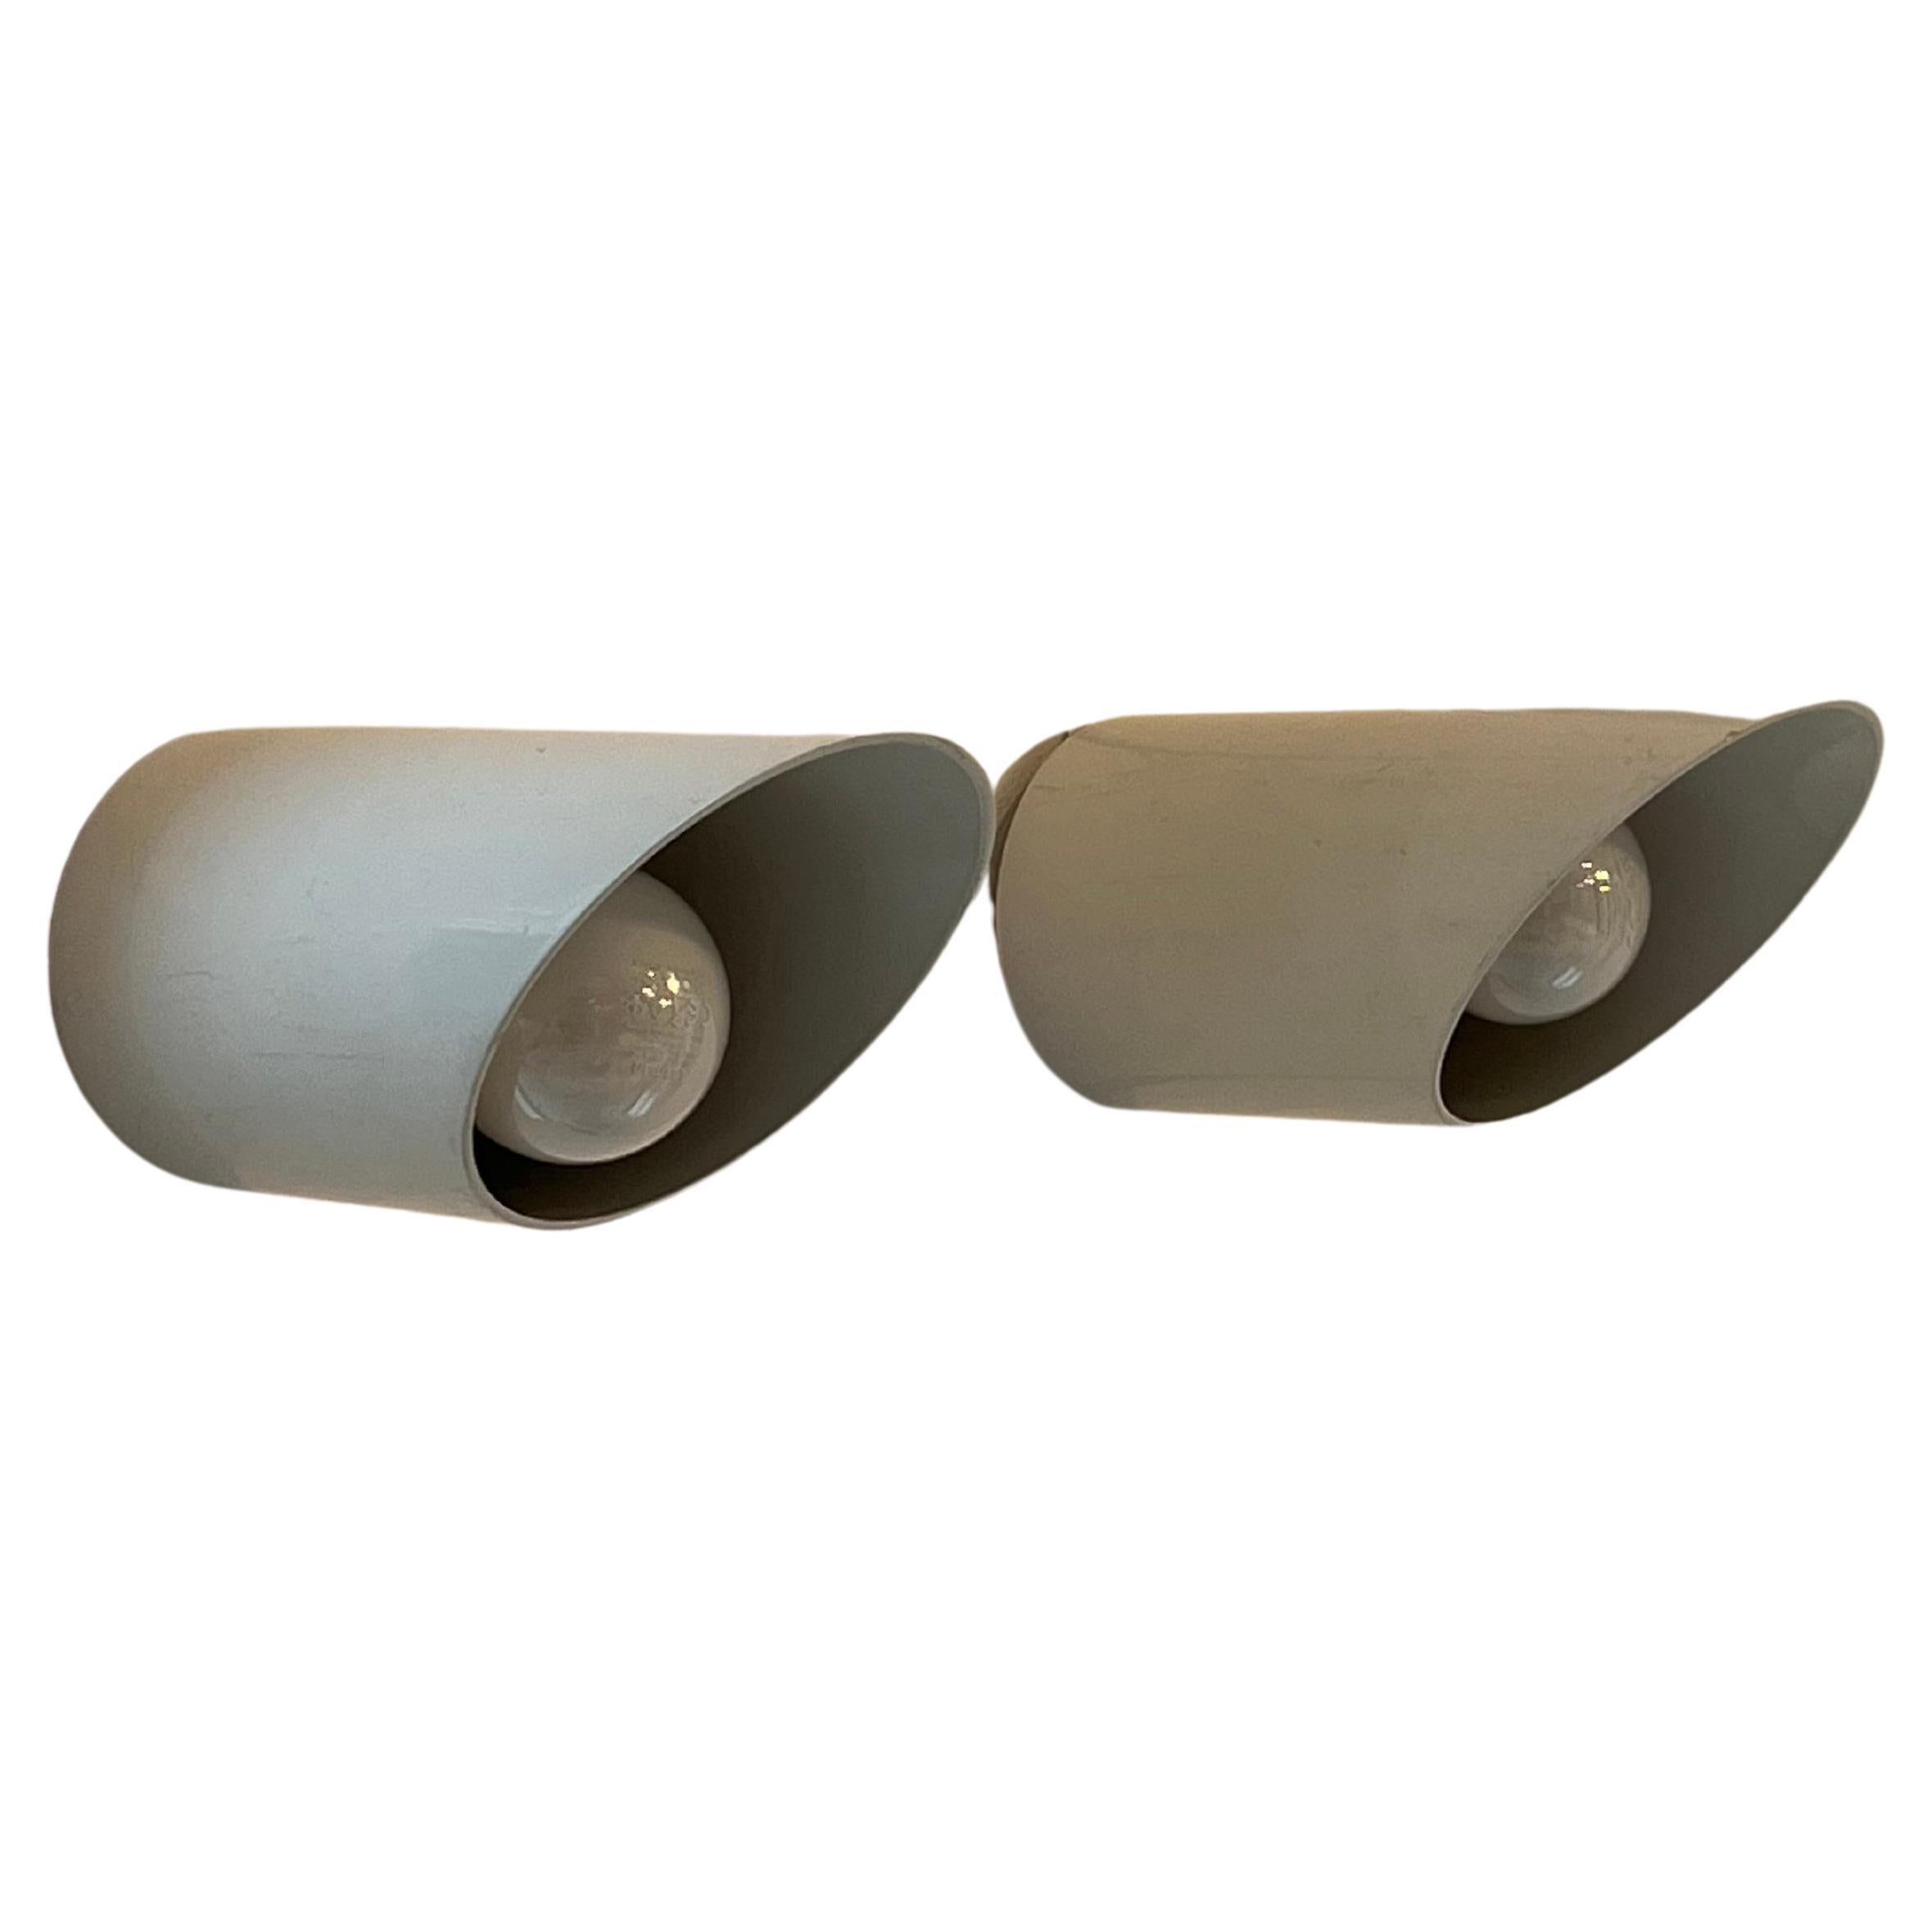 Pair of Obliqua wall lights by Ignazia Favata and Claudio Dini for Bieffeplast 1 For Sale